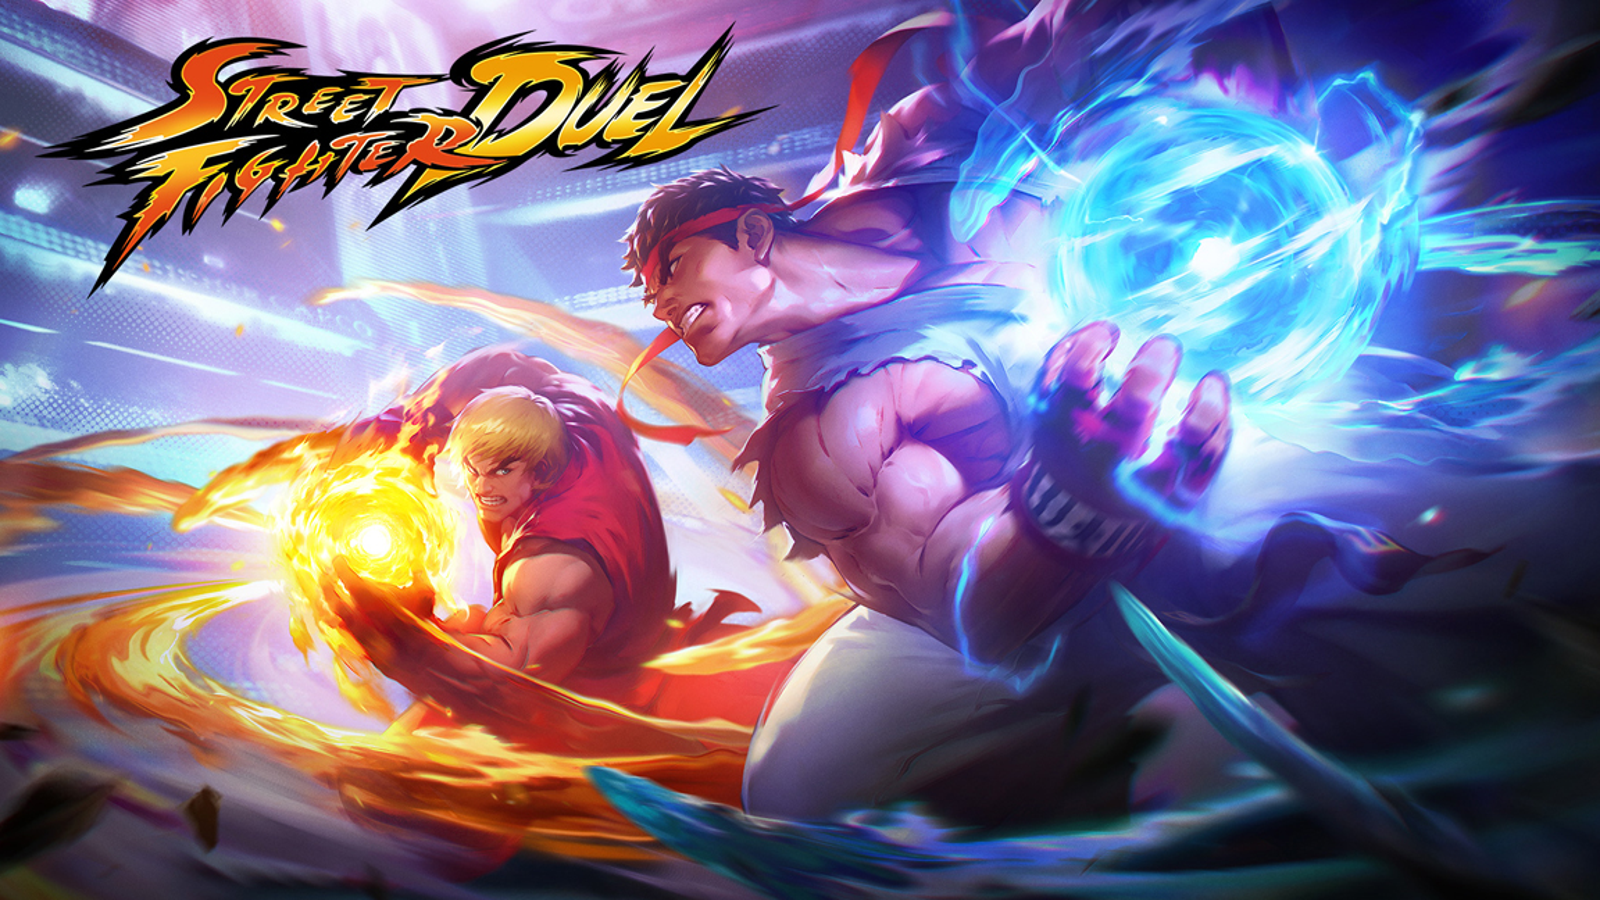 Street Fighter: Duel Codes - Droid Gamers